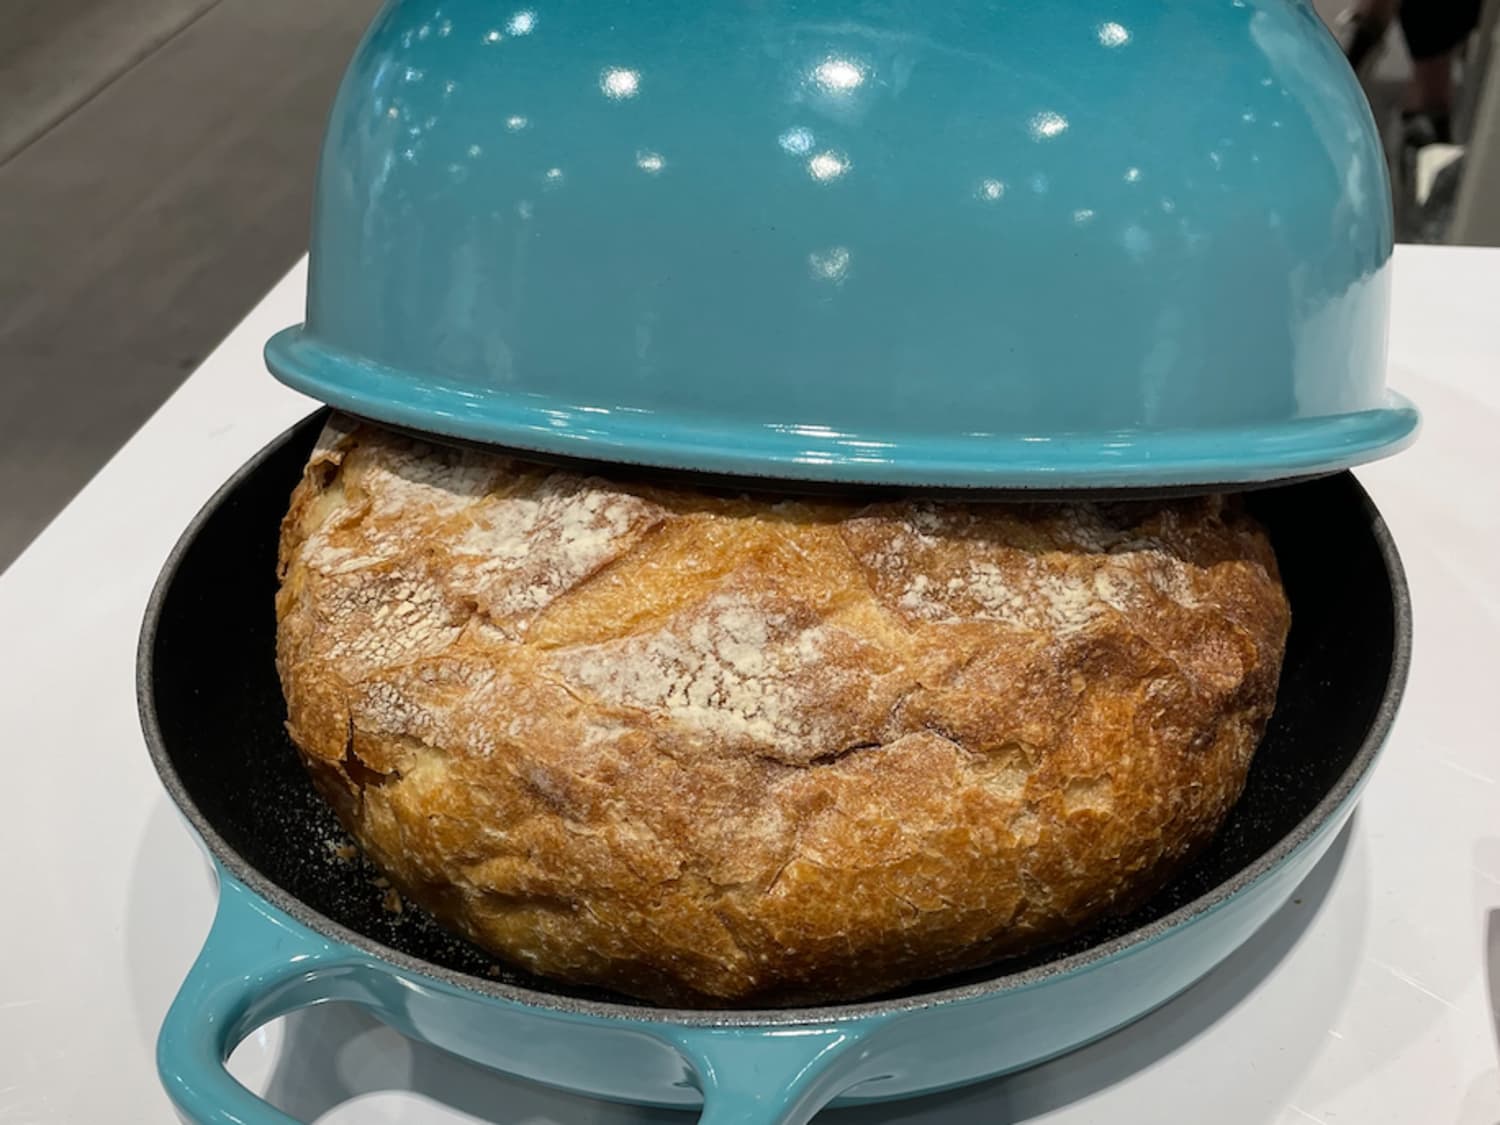 søskende Ekspert ørn I Tried the New Le Creuset Bread Oven - and I Love It | Apartment Therapy